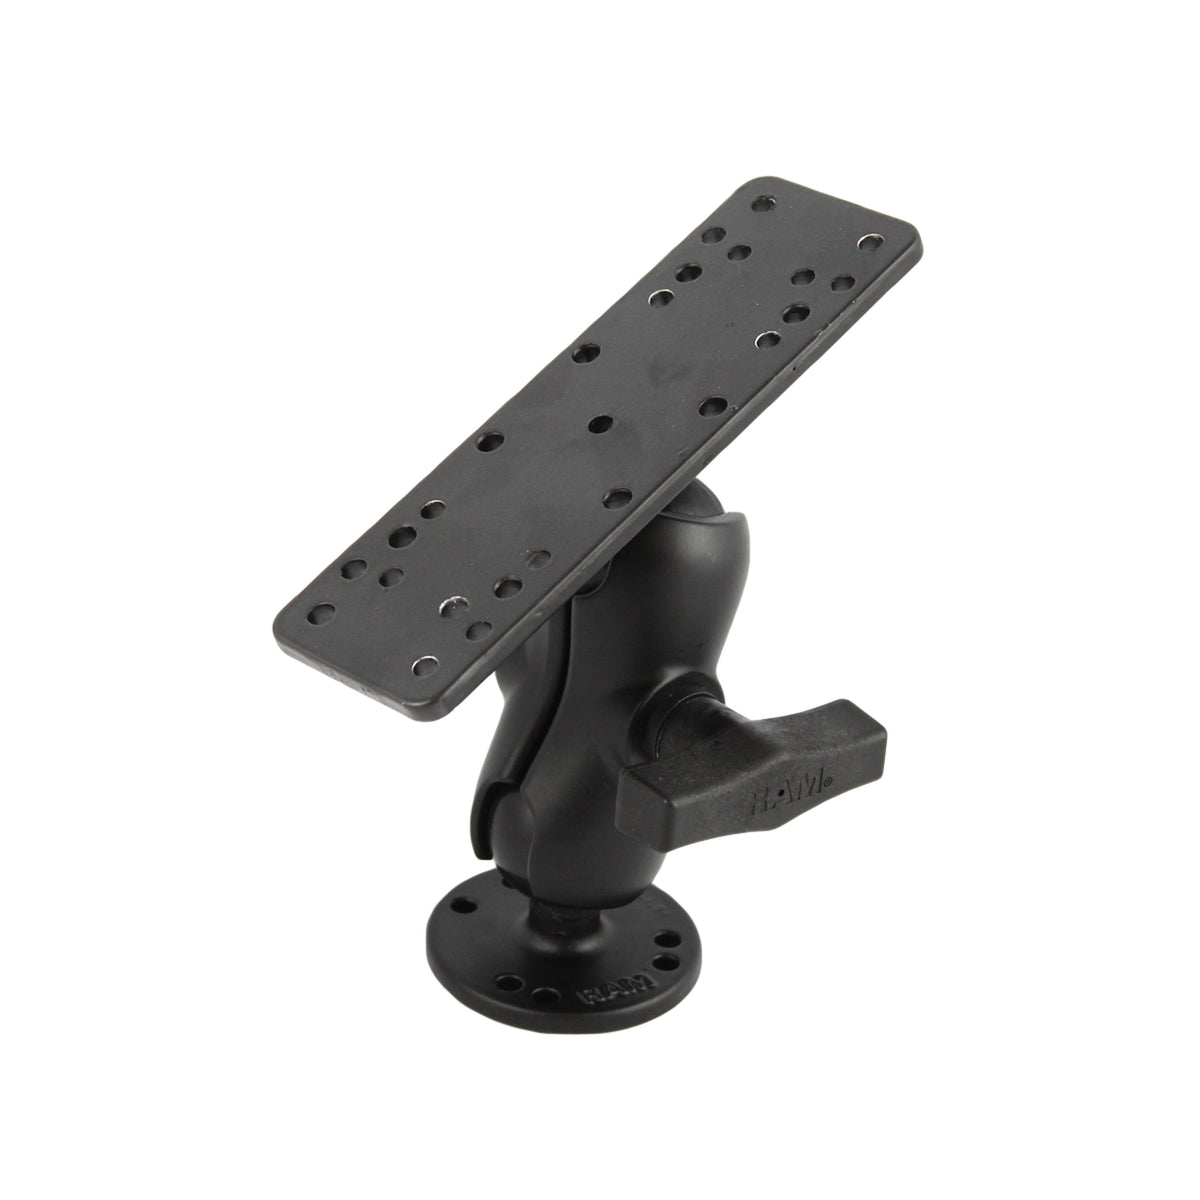 RAM 1.5" Diameter Ball Mount with Short Double Socket Arm and Rectangle Base